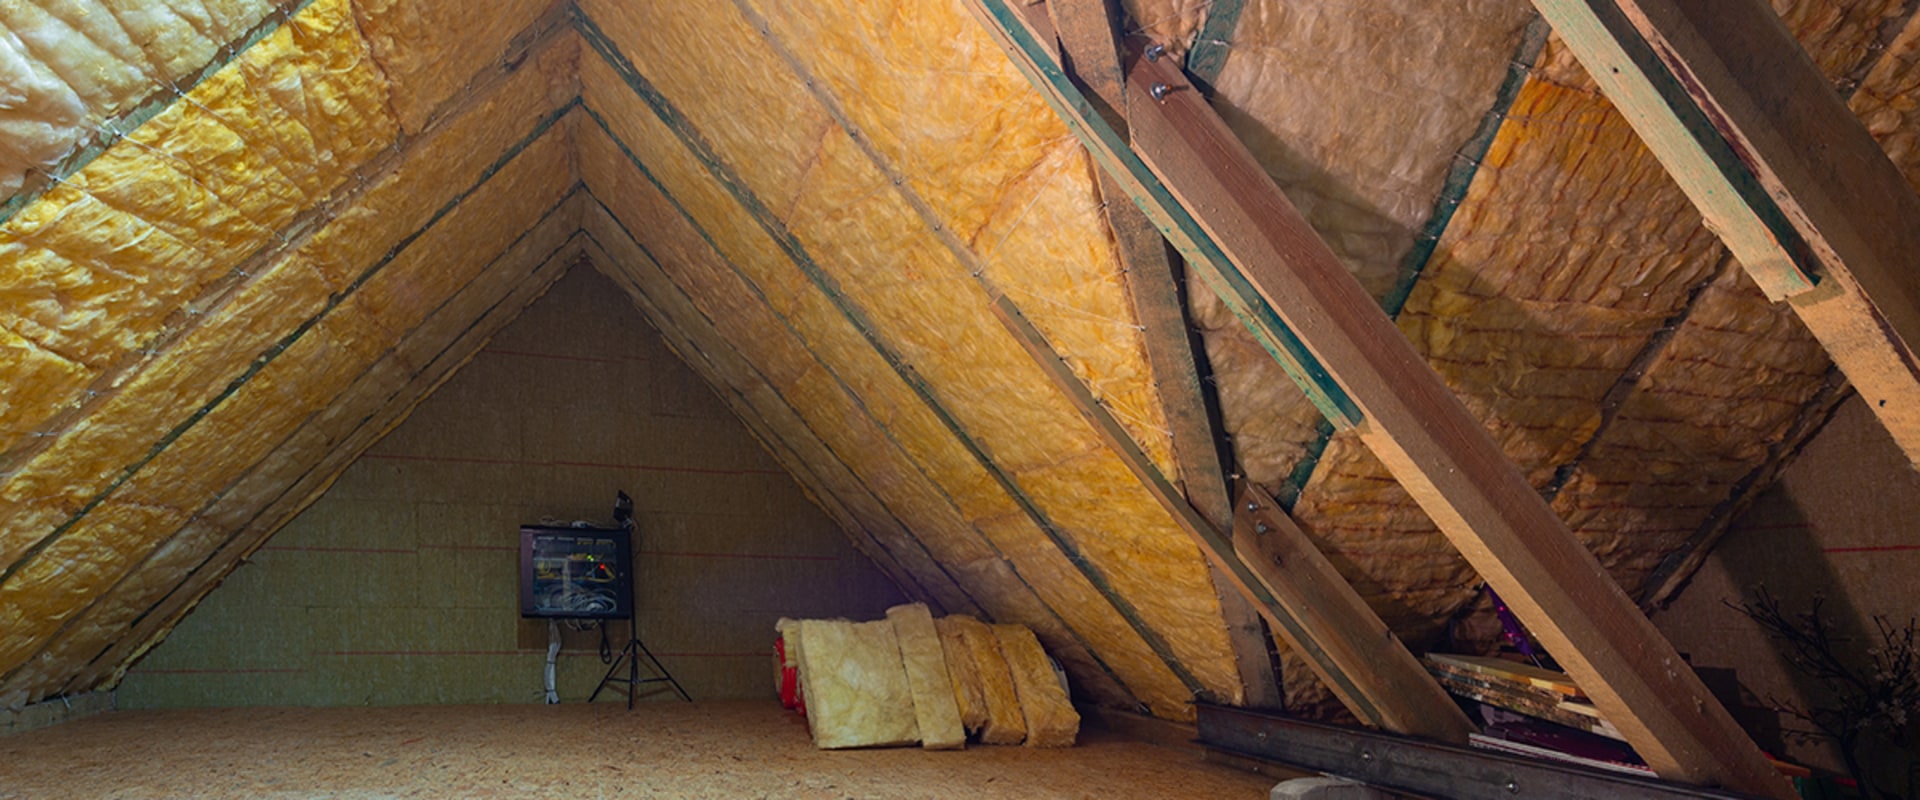 How Often Should You Inspect Your Attic Insulation for Damage or Wear and Tear?